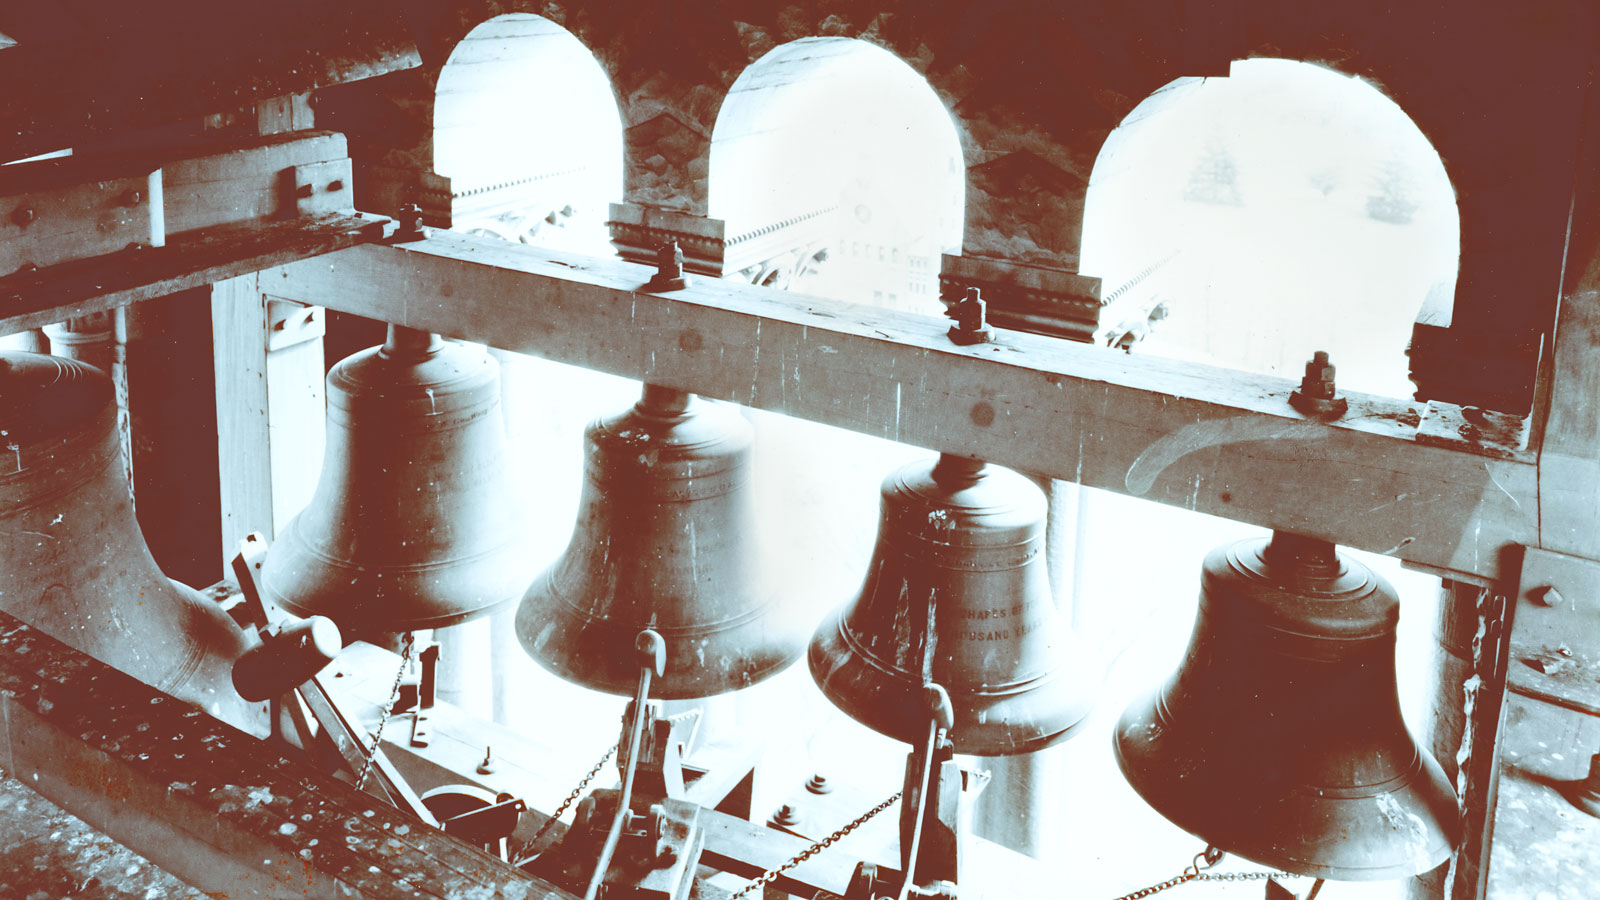 A vintage shot of the Cornell Chimes bells in the tower